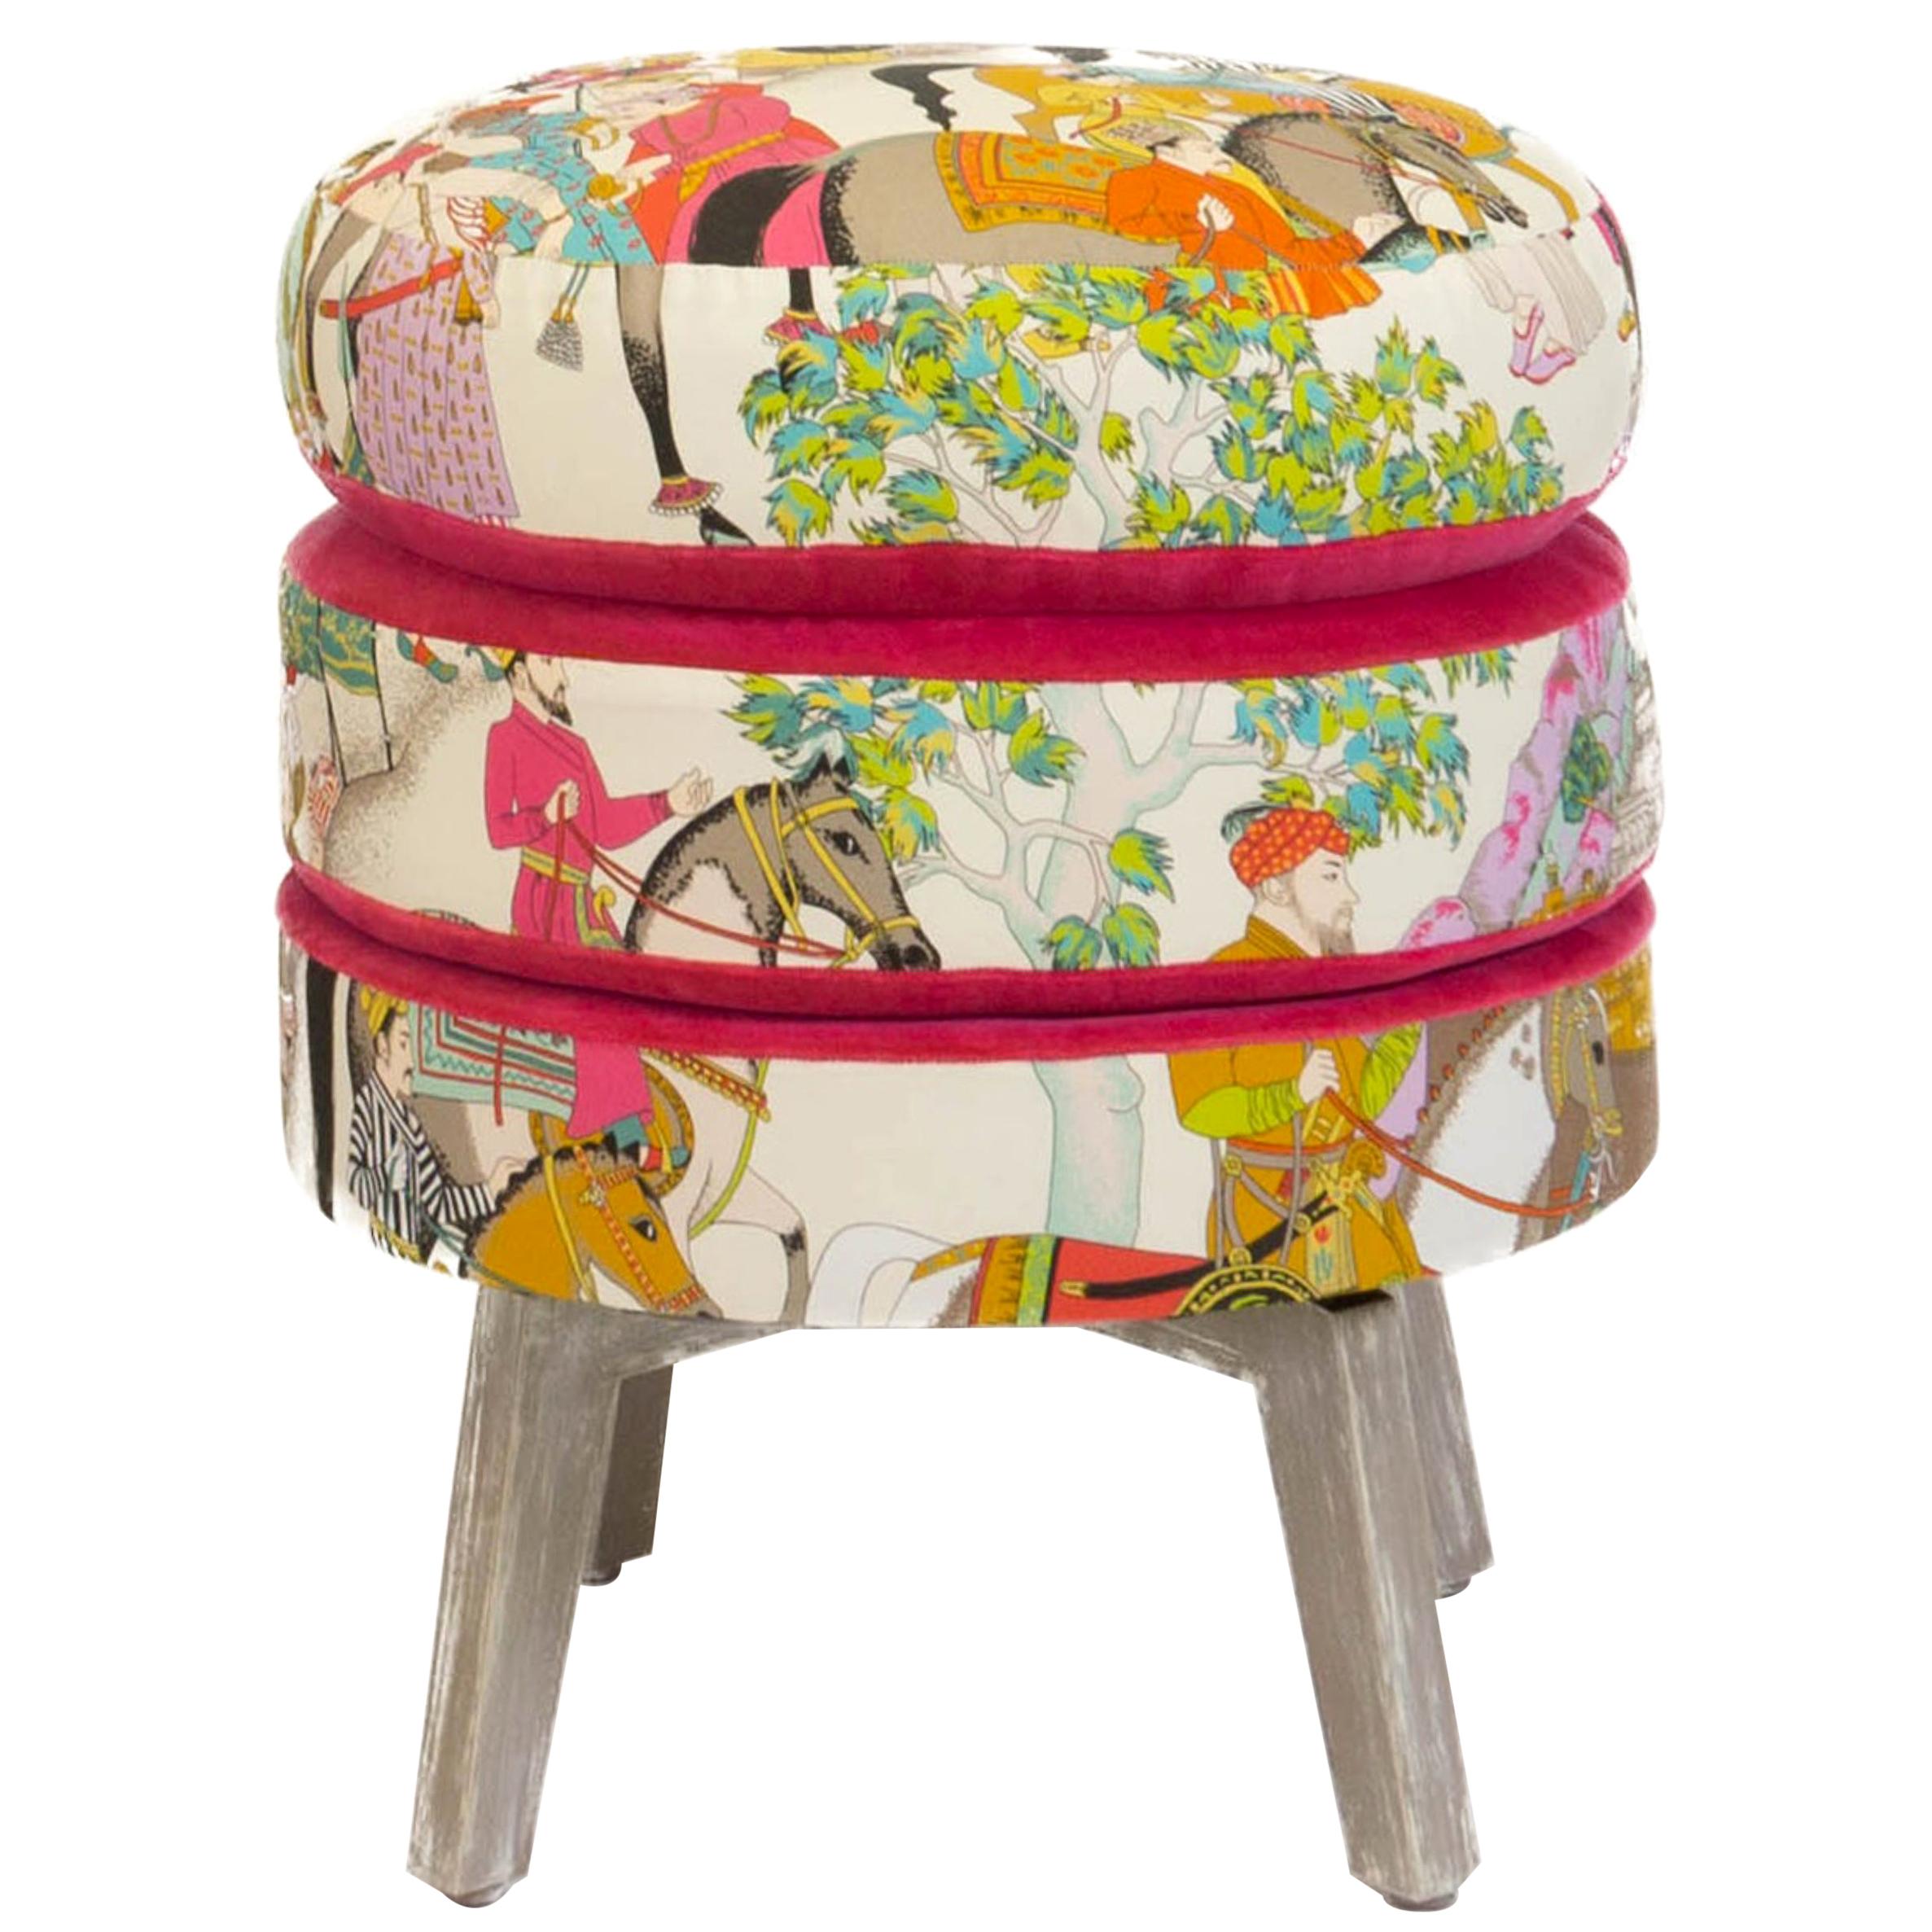 Patterned Three Layered Cushioned Ottoman Stool with Pink Velvet Accent Fabric